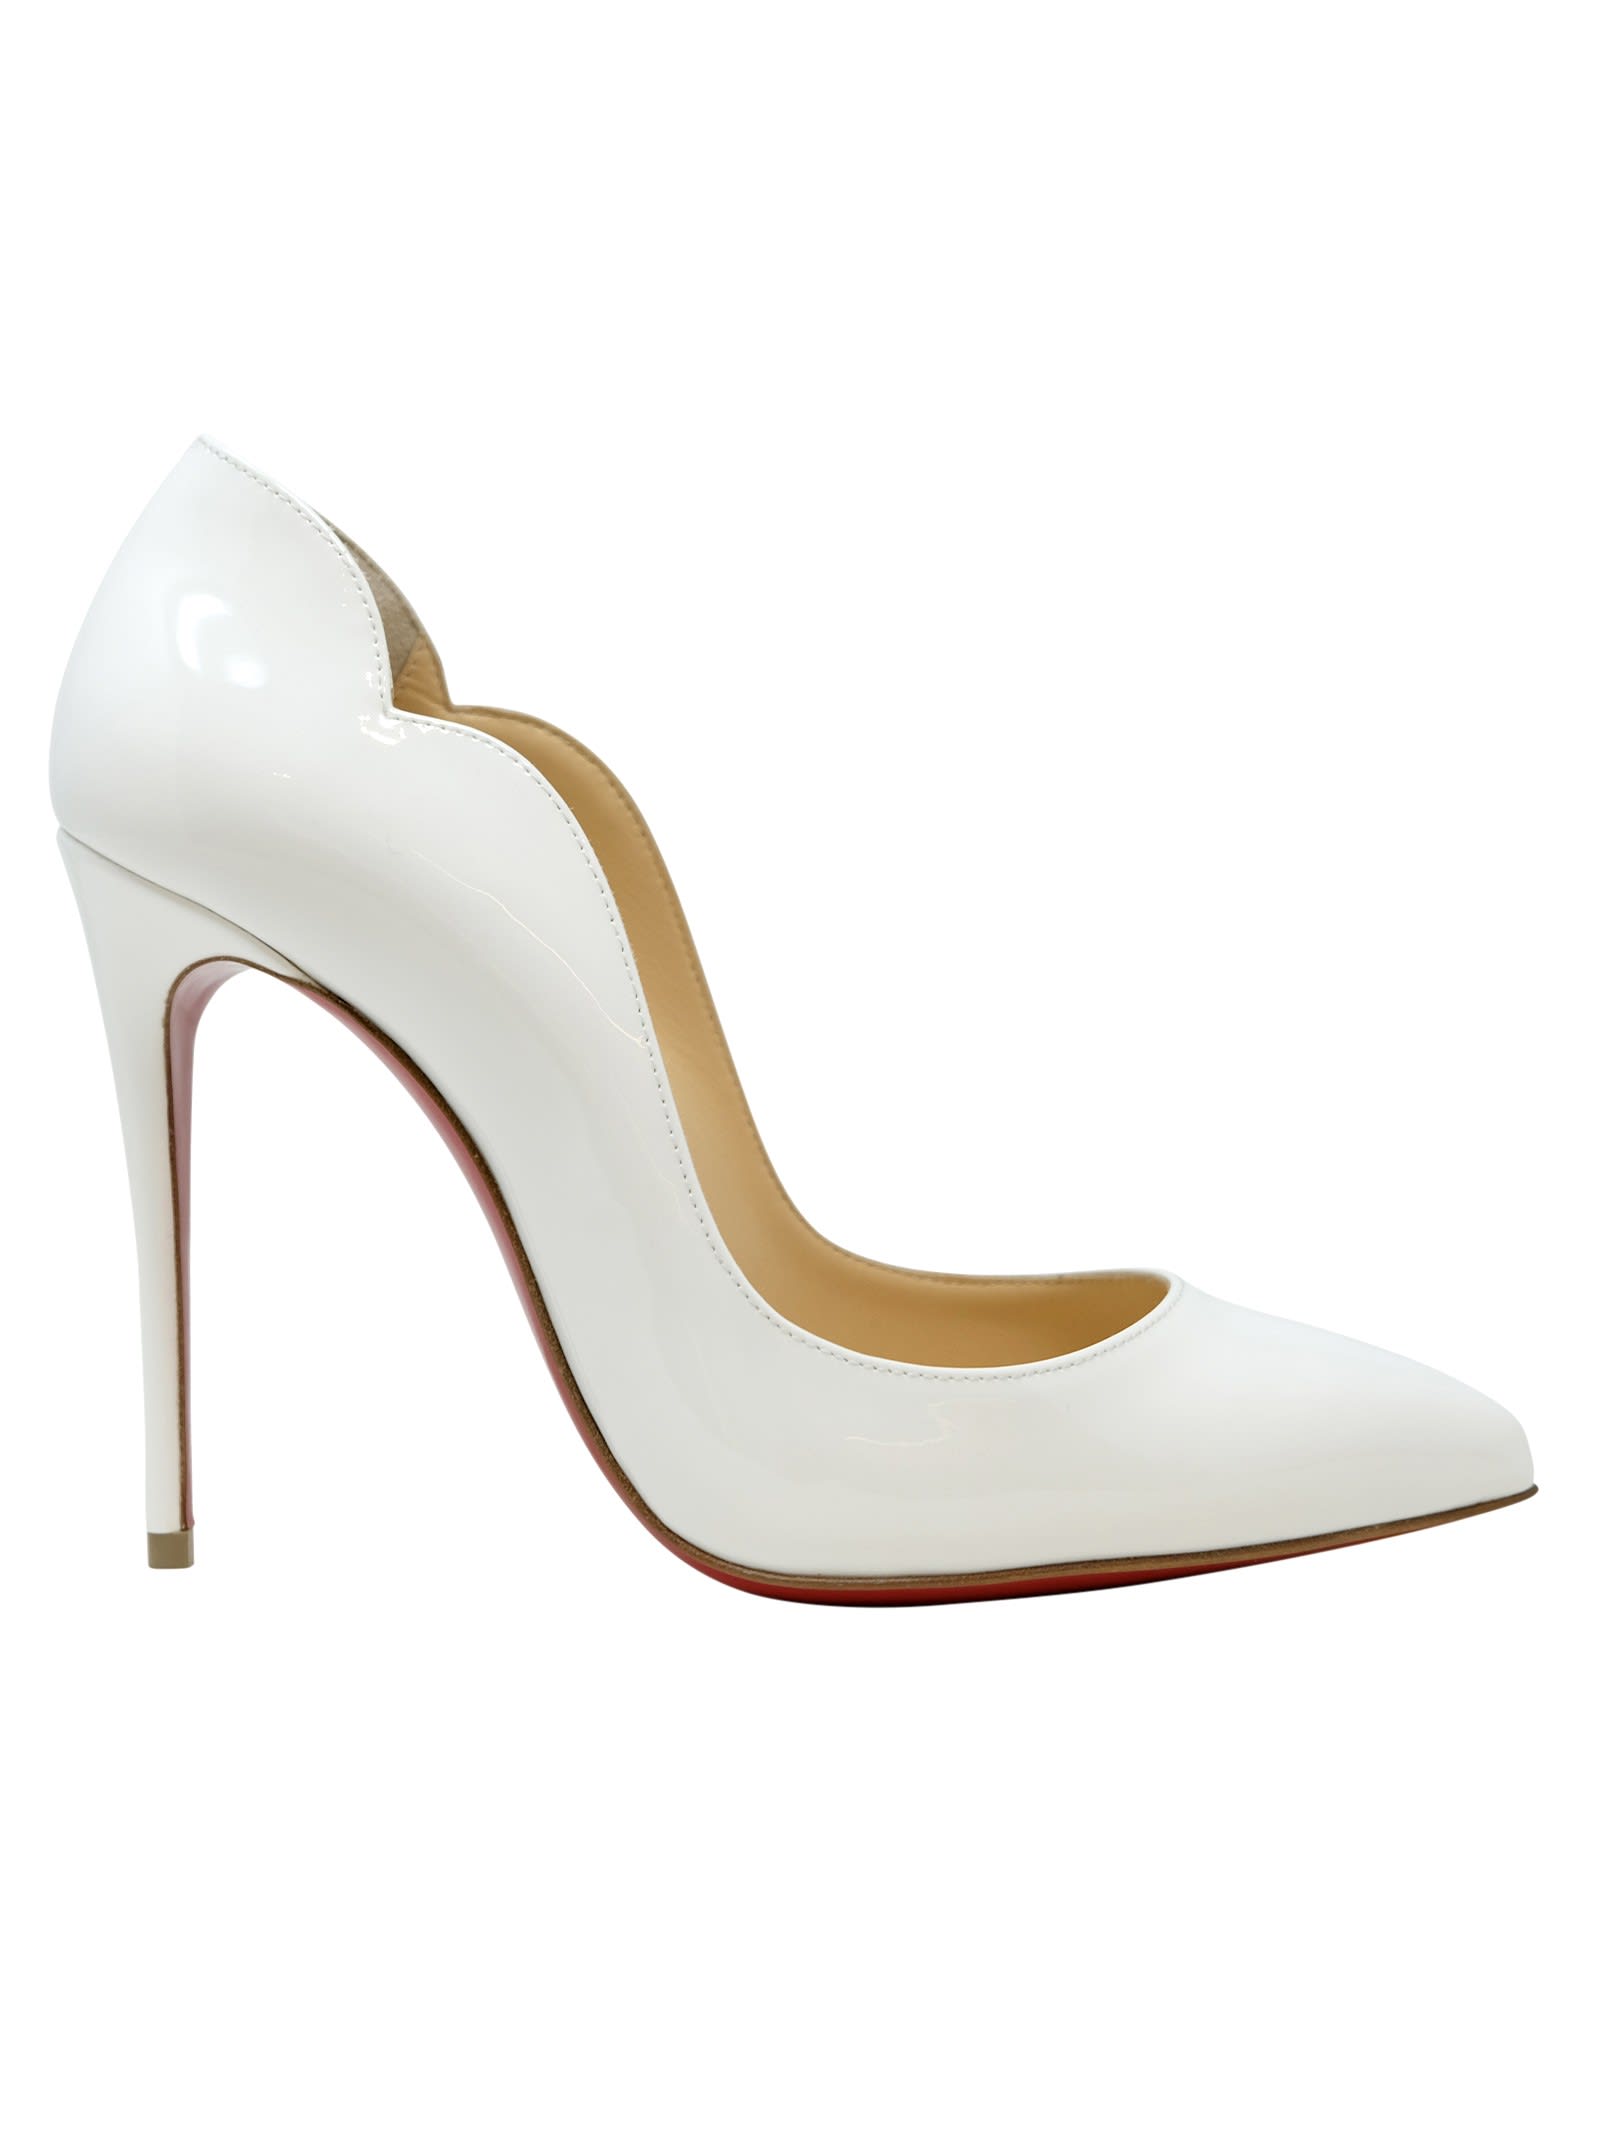 White Patent Leather Hot Chick 100 Pumps